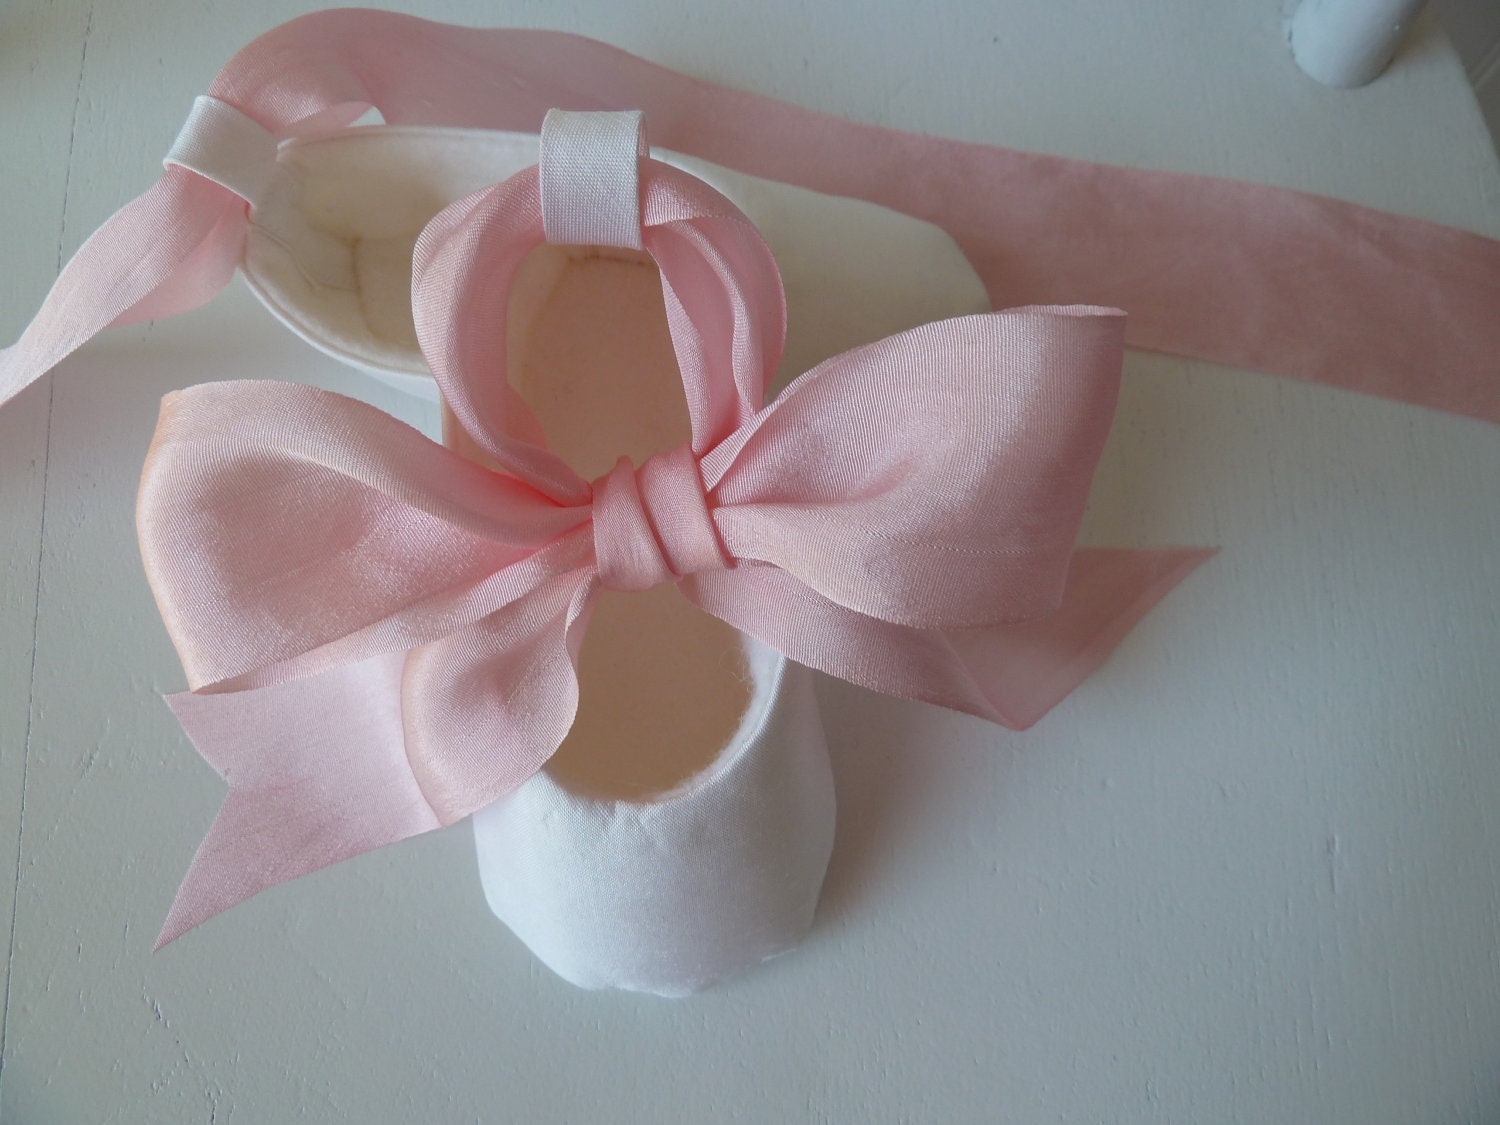 Baby Ballet Shoes . Pink and White Silk Christening Shoes . Handmade Ballet Slippers Flats . Infant Girl Gift Idea